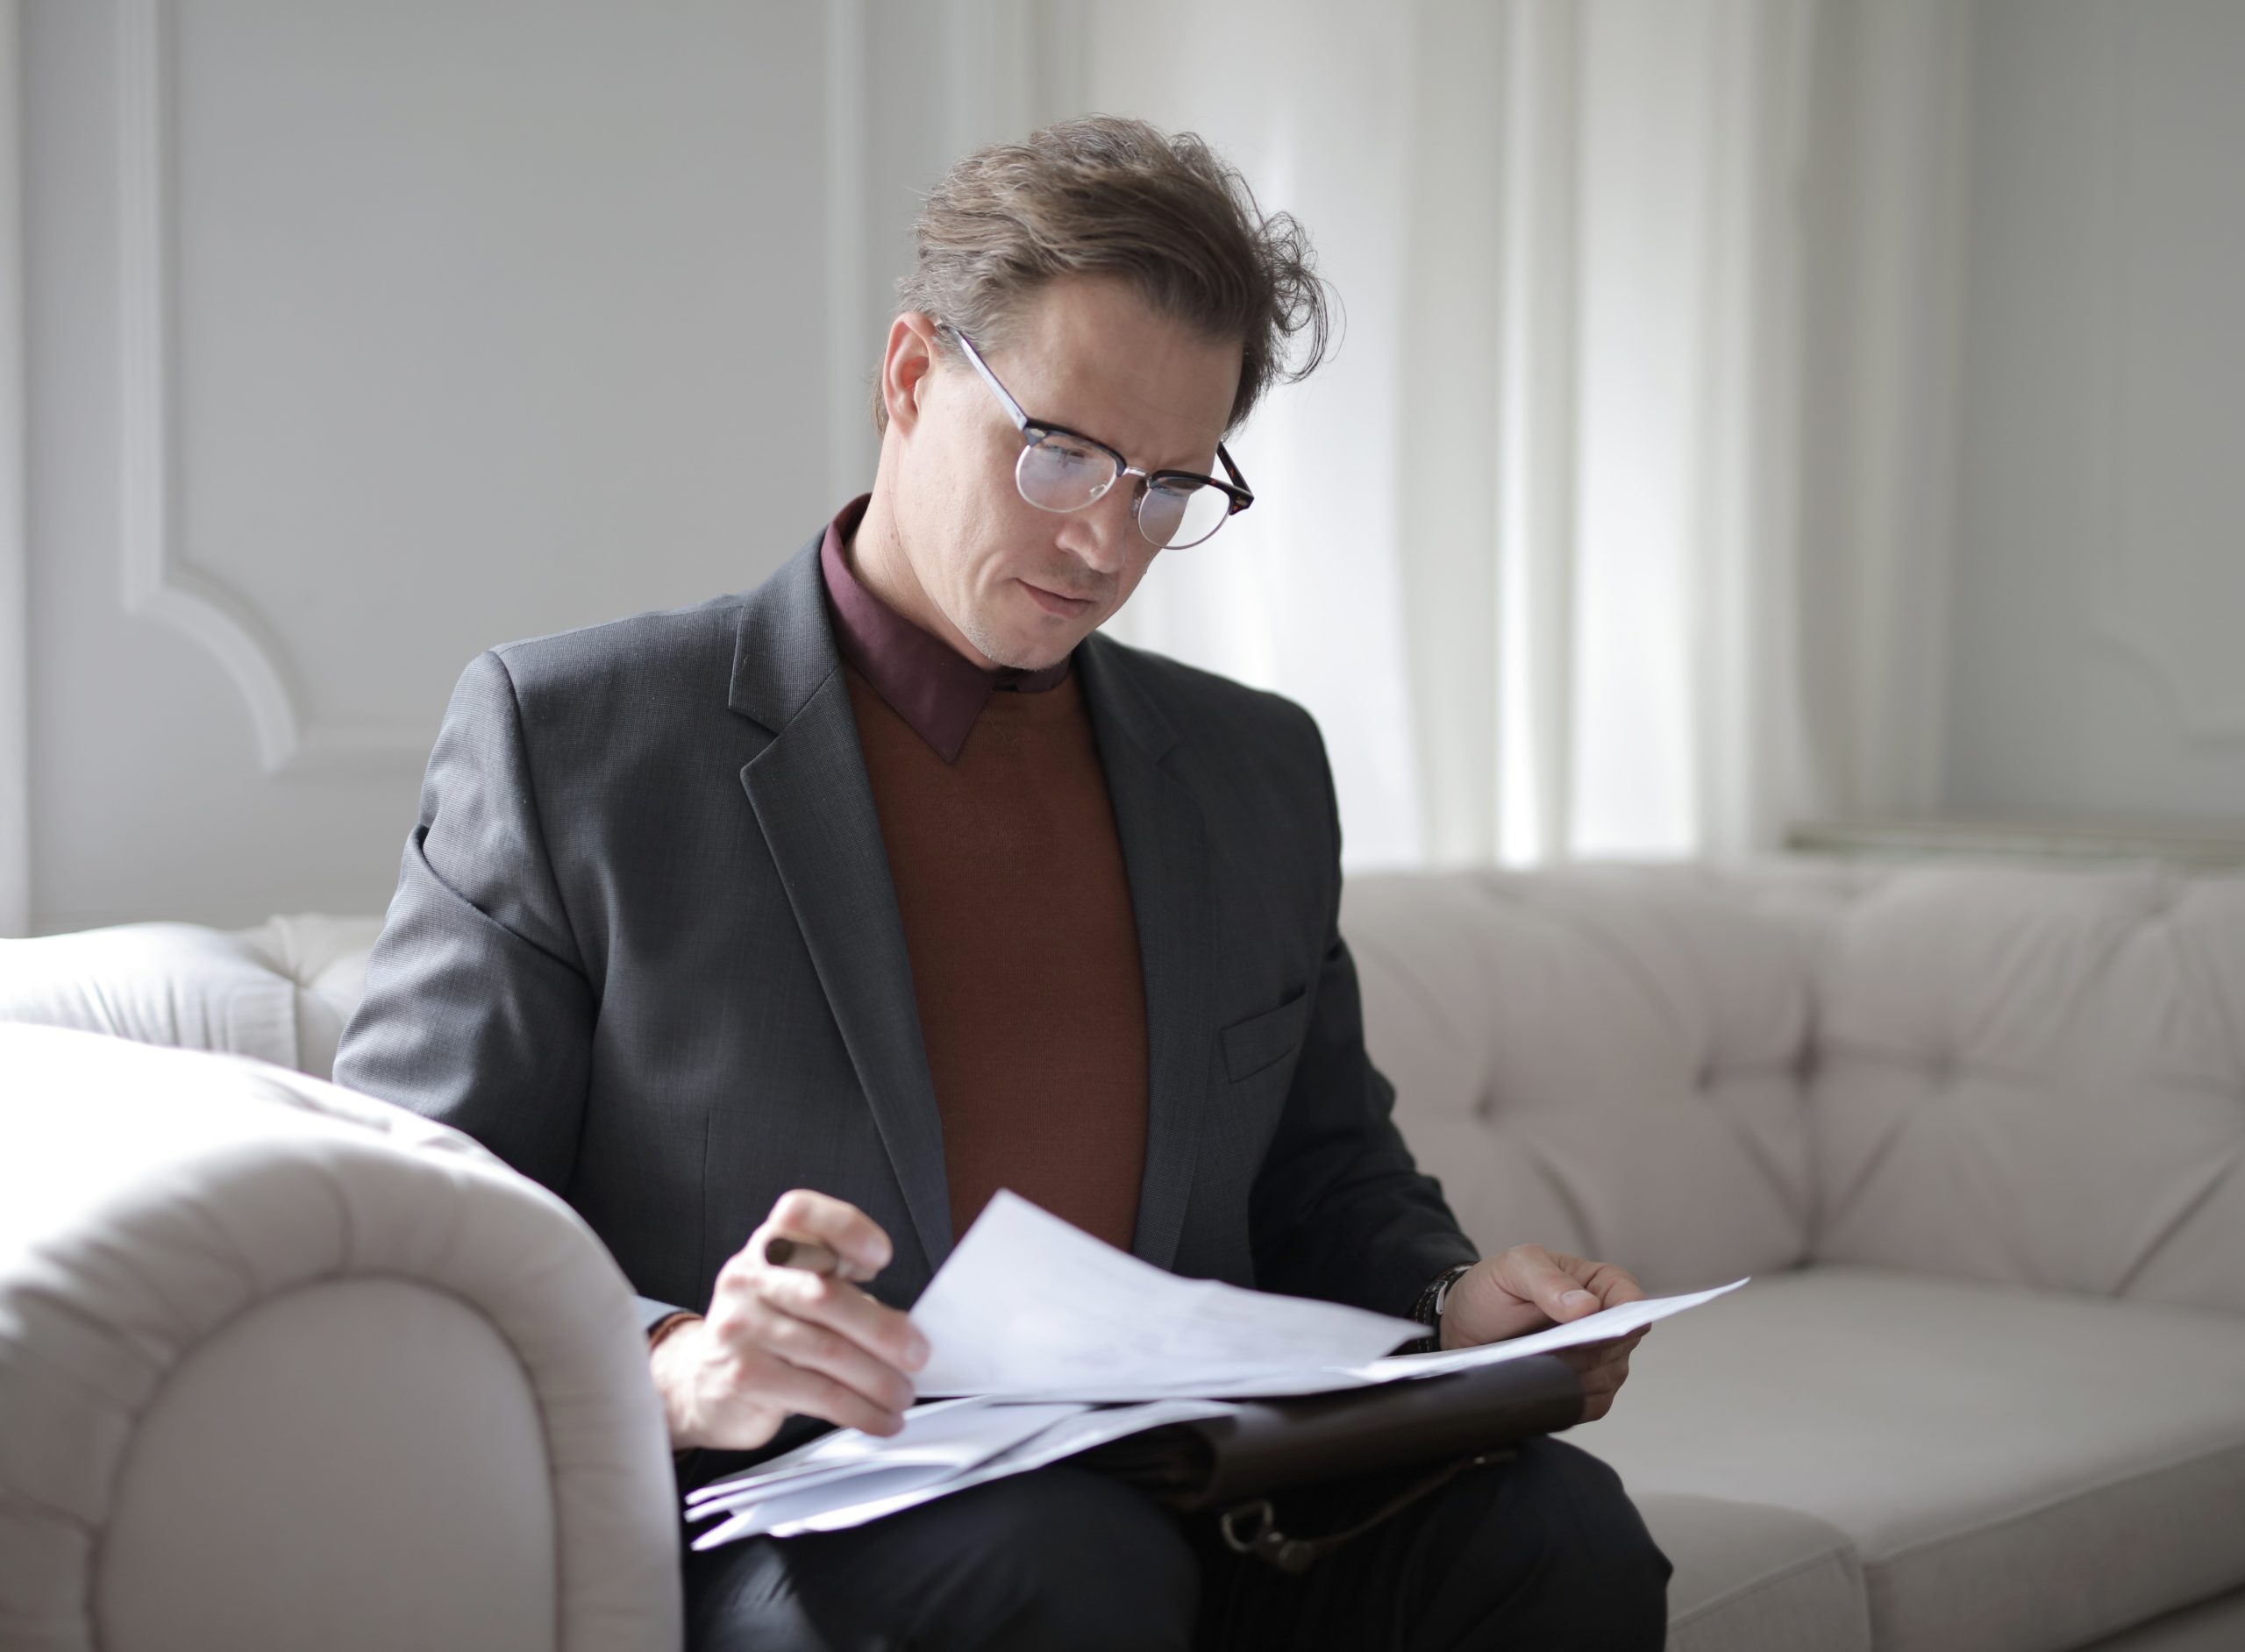 This picture demonstrates a man reviewing his life insurance policy.